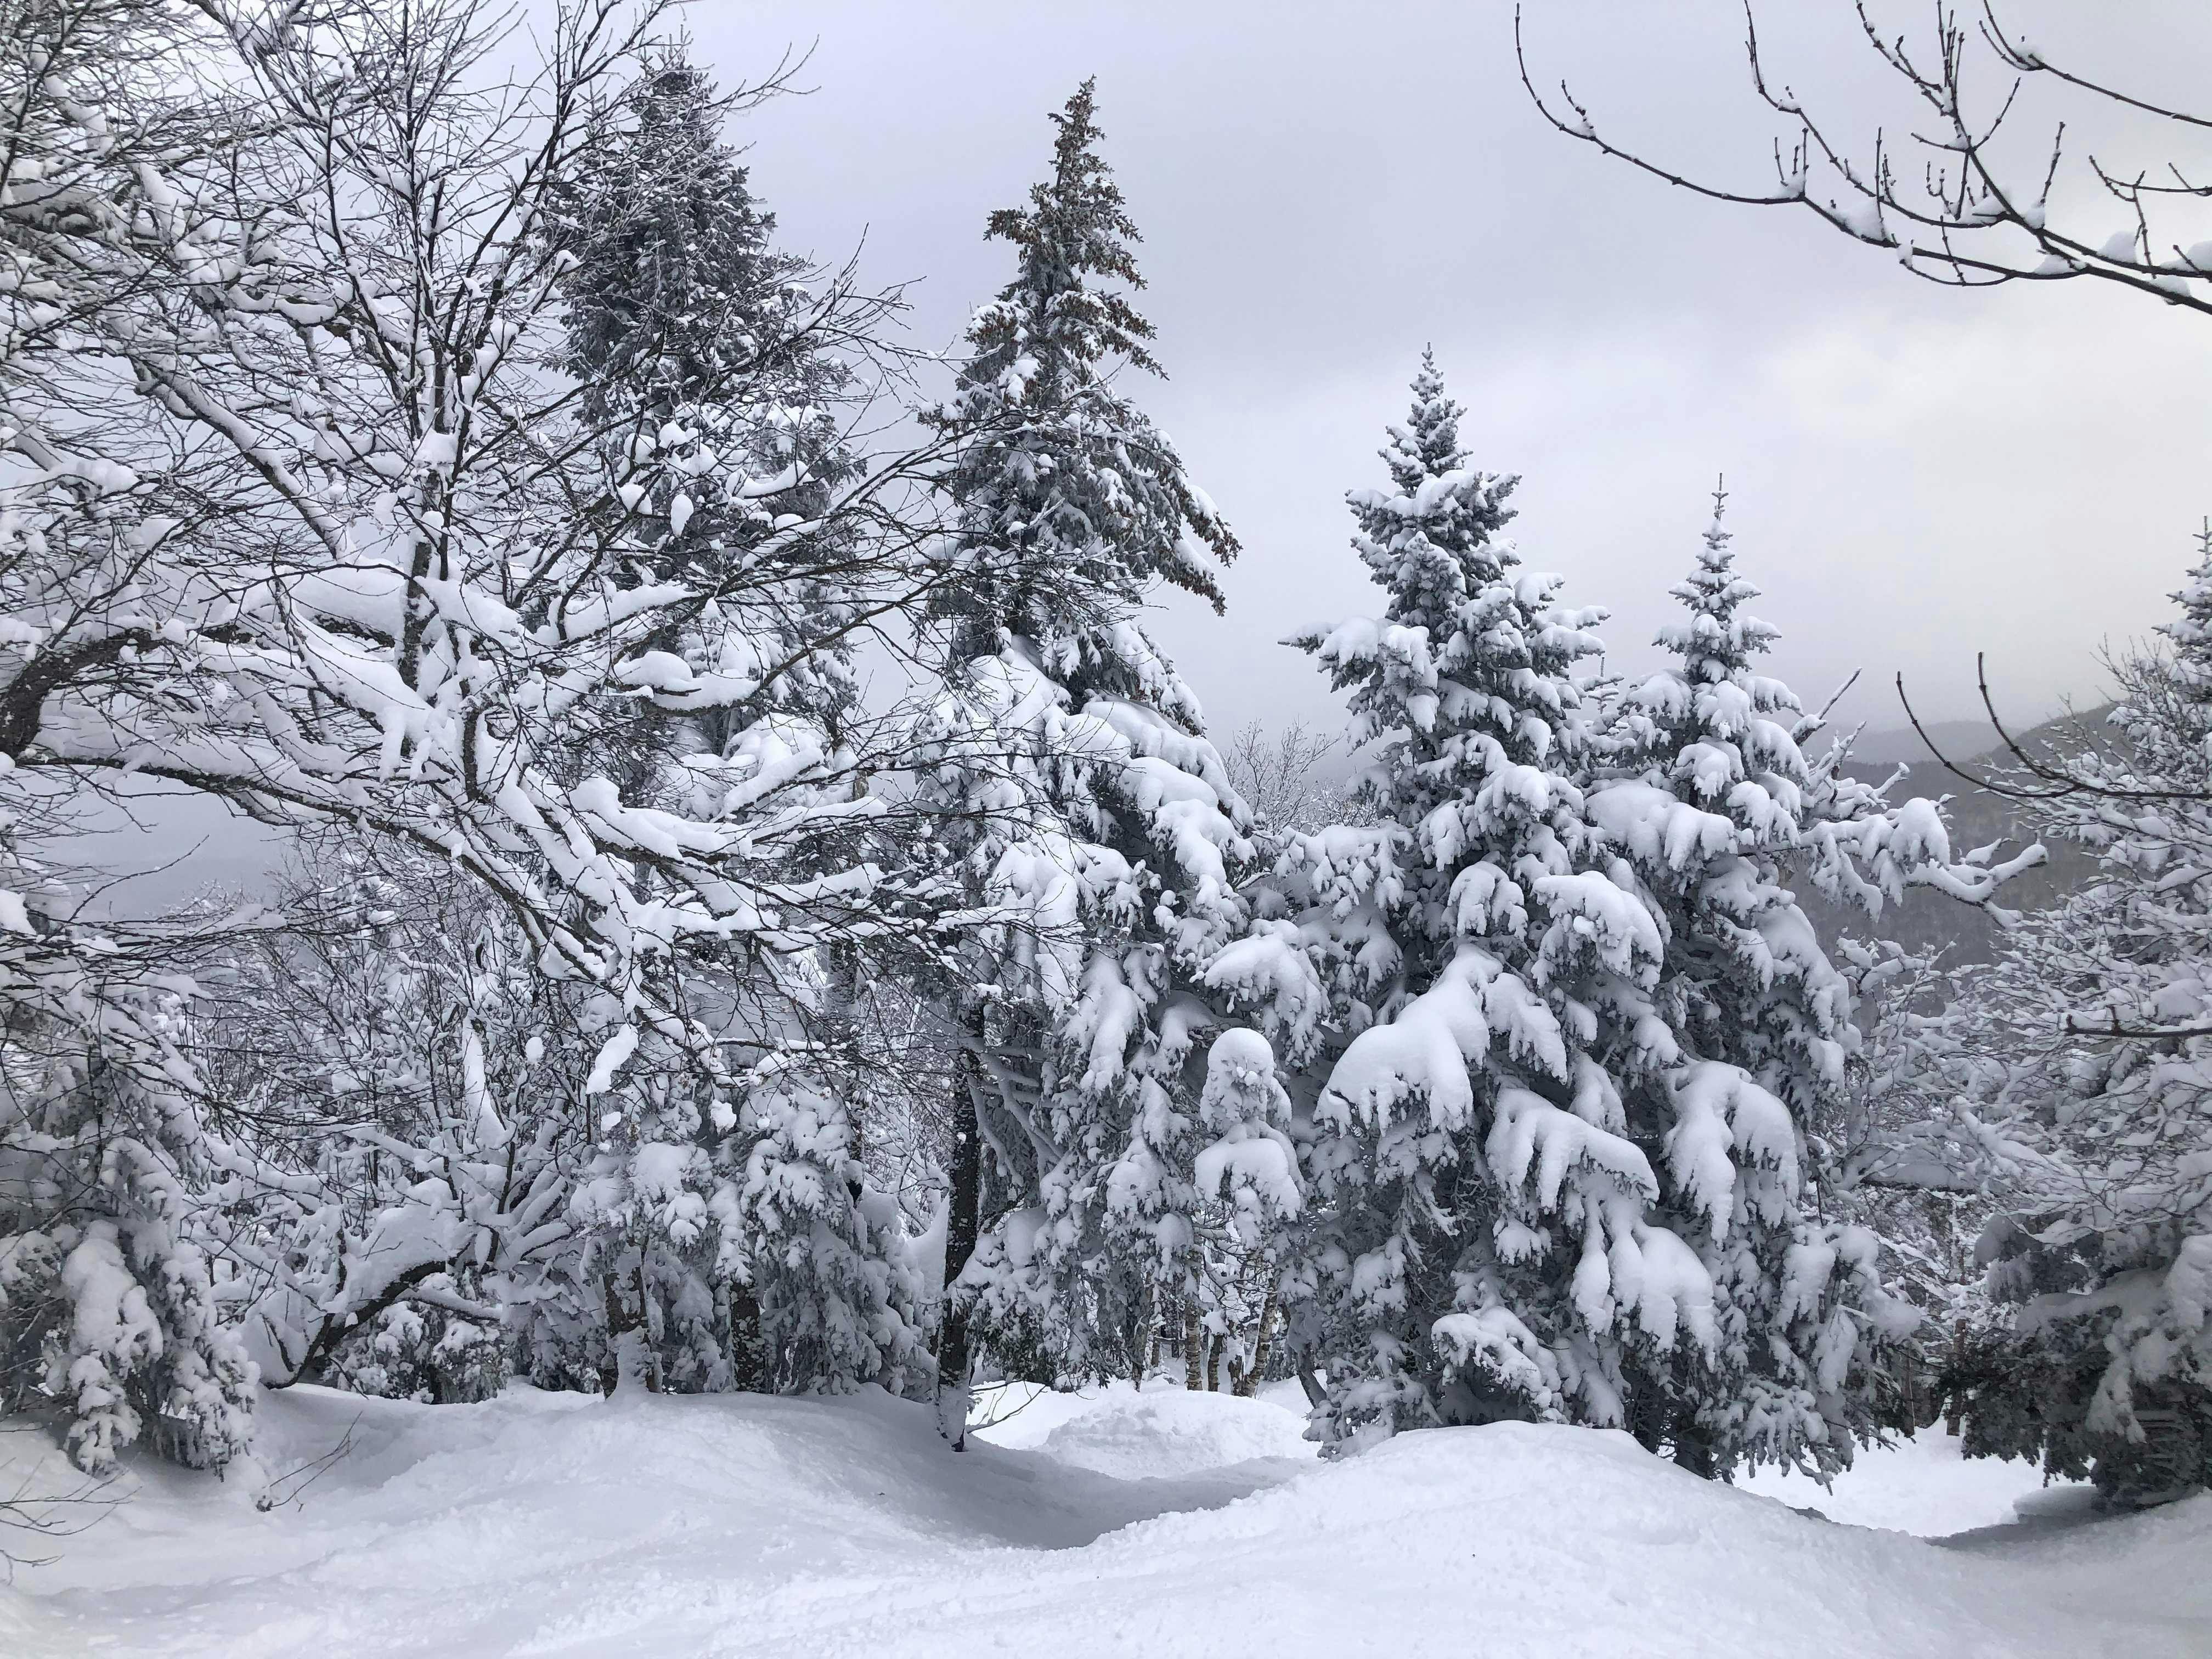 A snowy forest on a cloudy day